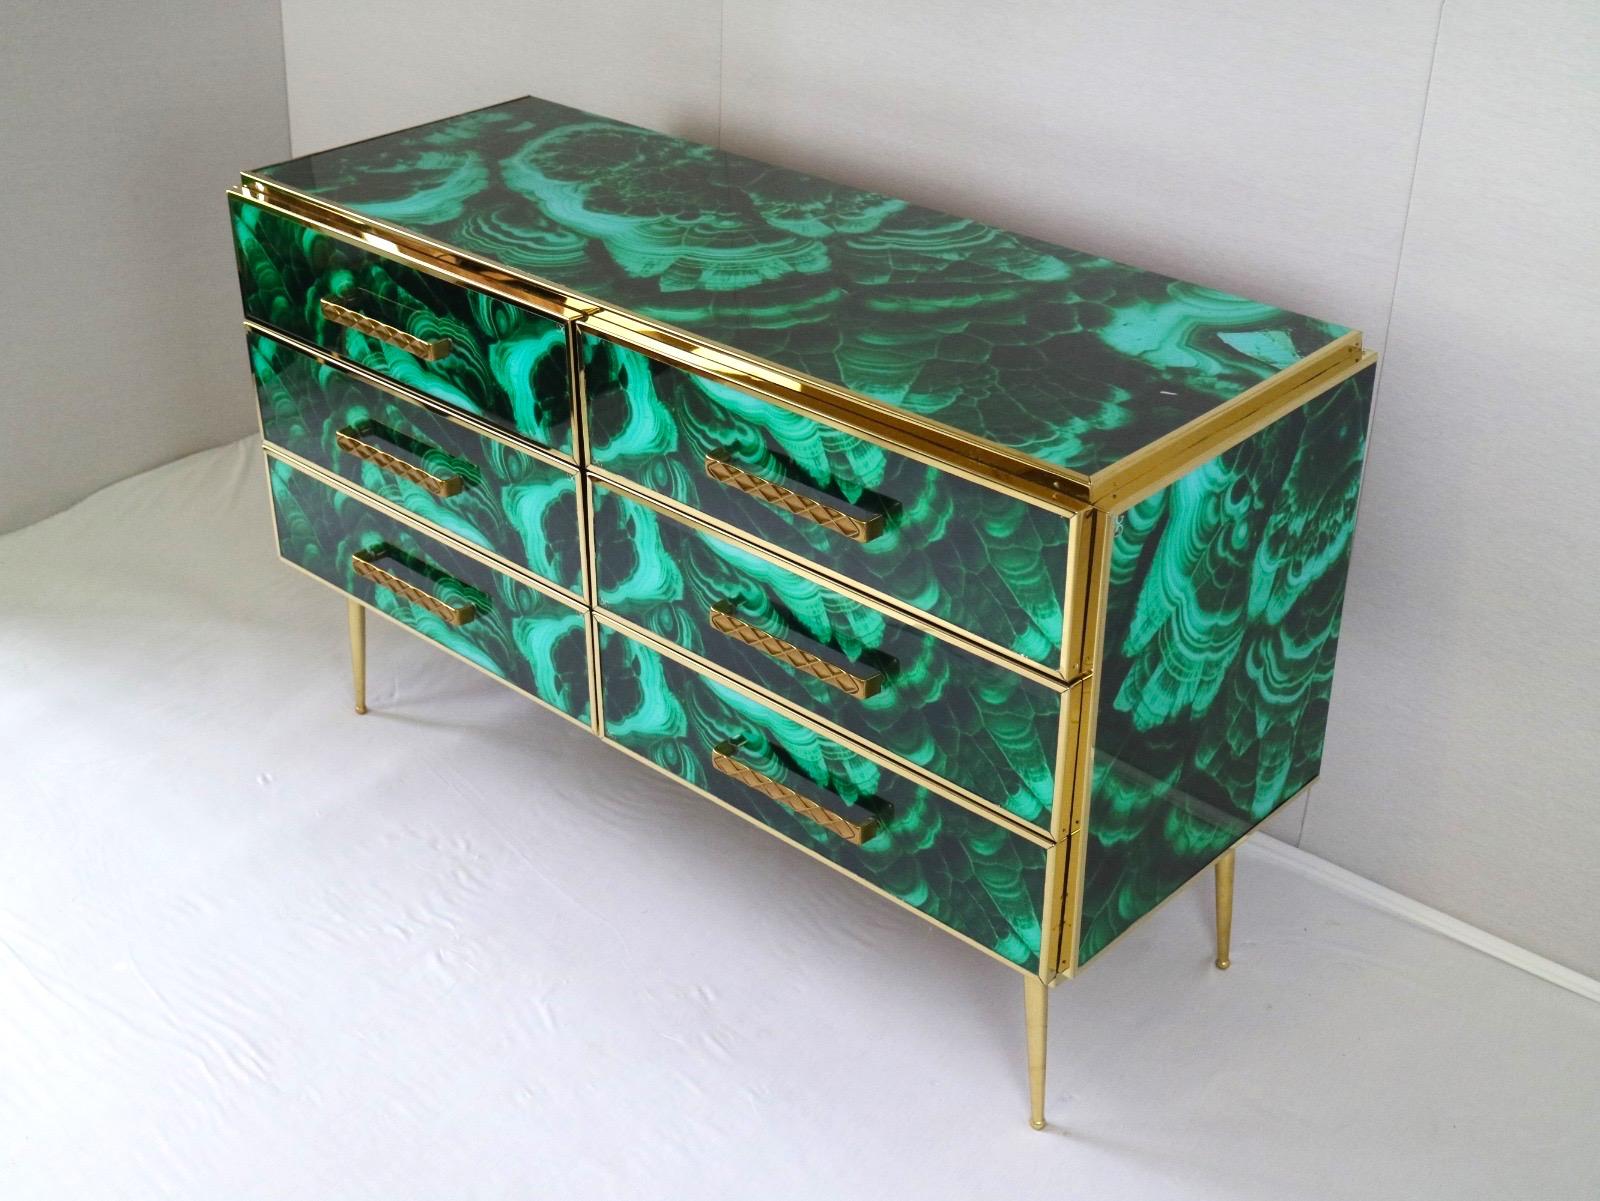 Striking brass frame and hand-cut Malachite imitation Murano glass Commode or chest of drawer, raised on special brass legs. 
Handmade by a master artisan.